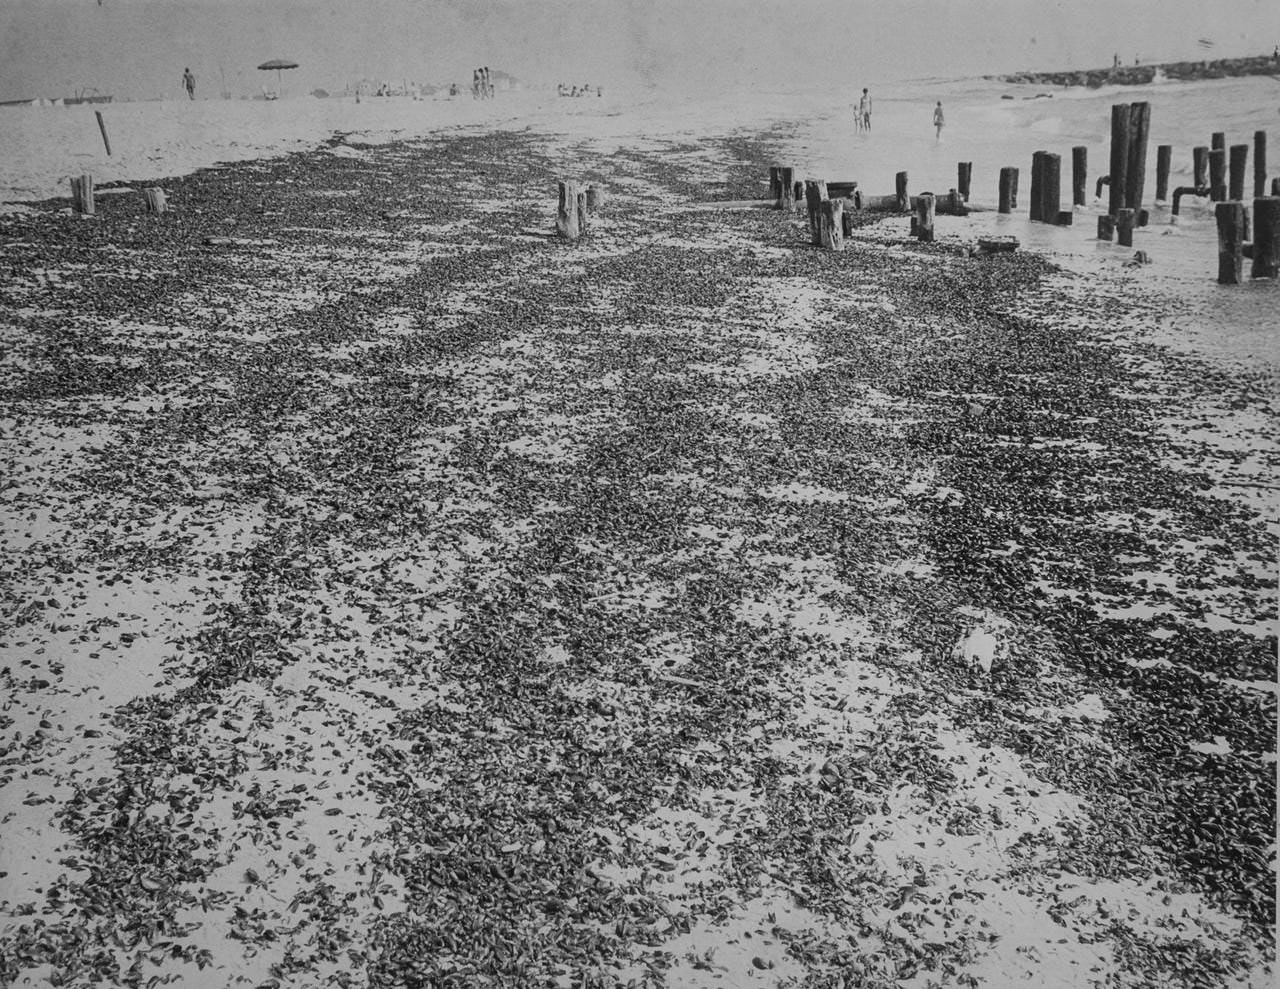 7th Avenue beach view of mussels washed ashore, 1973